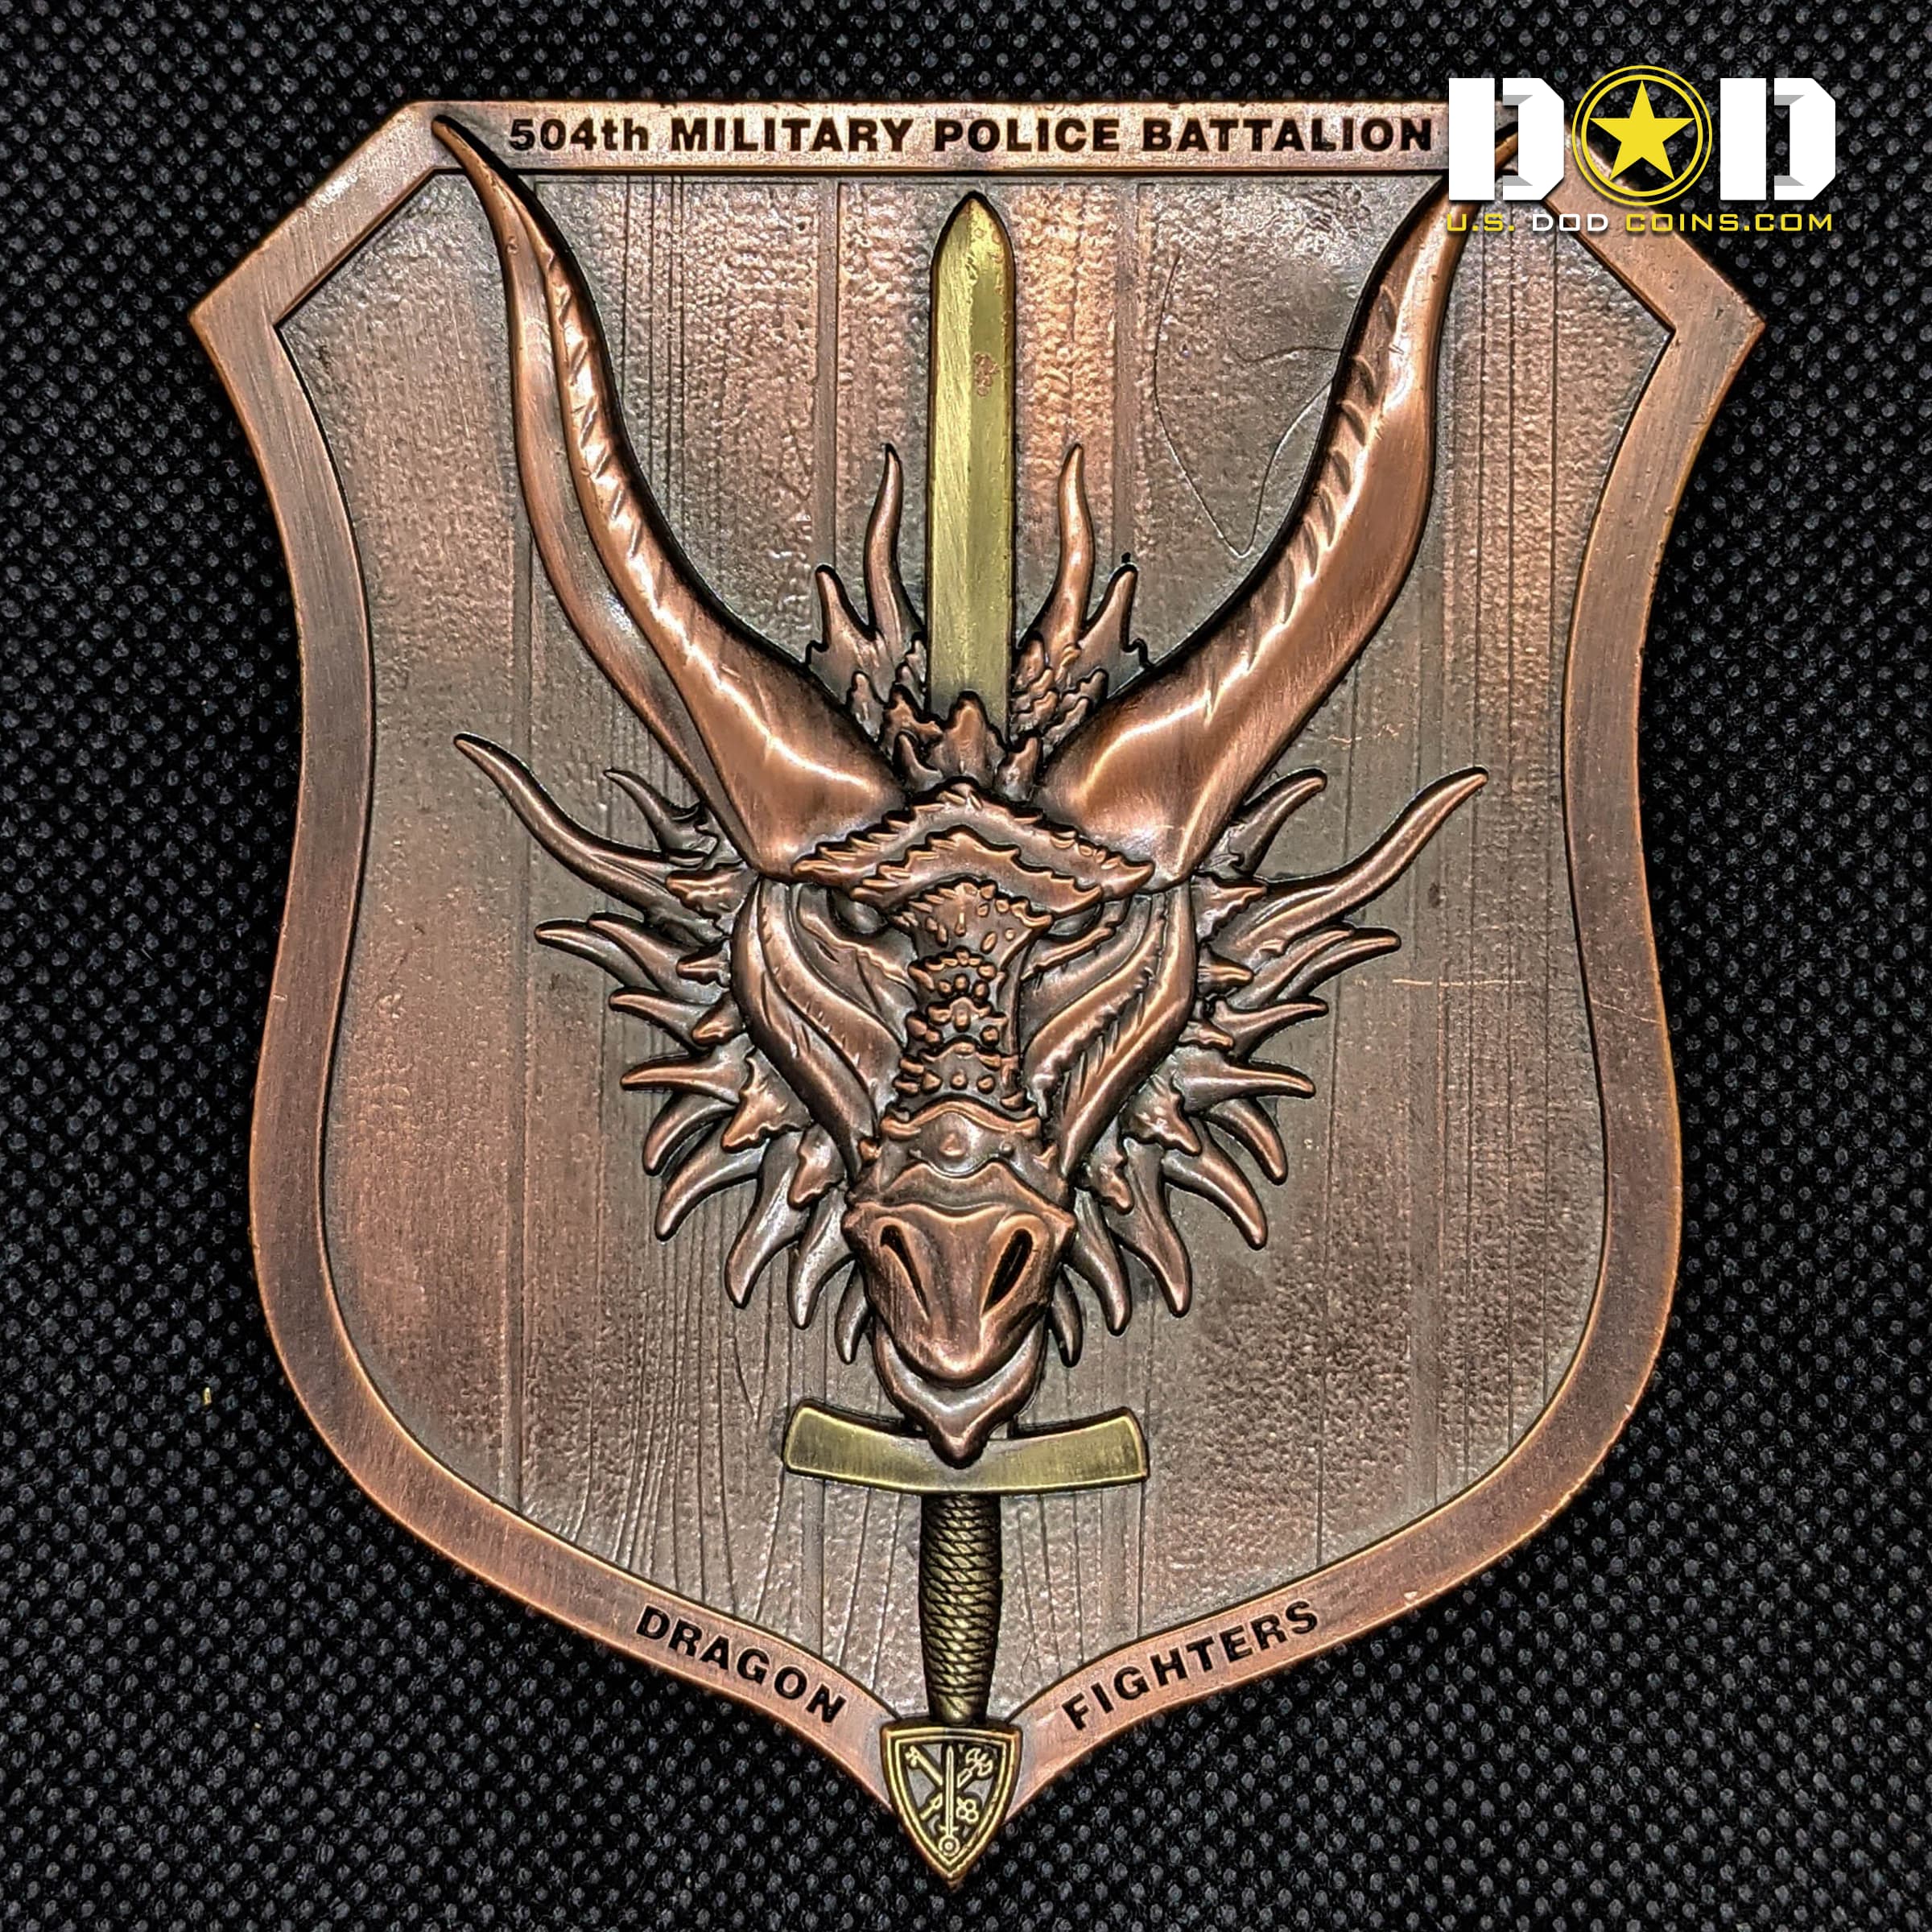 504th-Military-Police-Battalion-Dragon-Fighters_0000_USDODCoins-Challenge-Coins-Examples-43 (2)